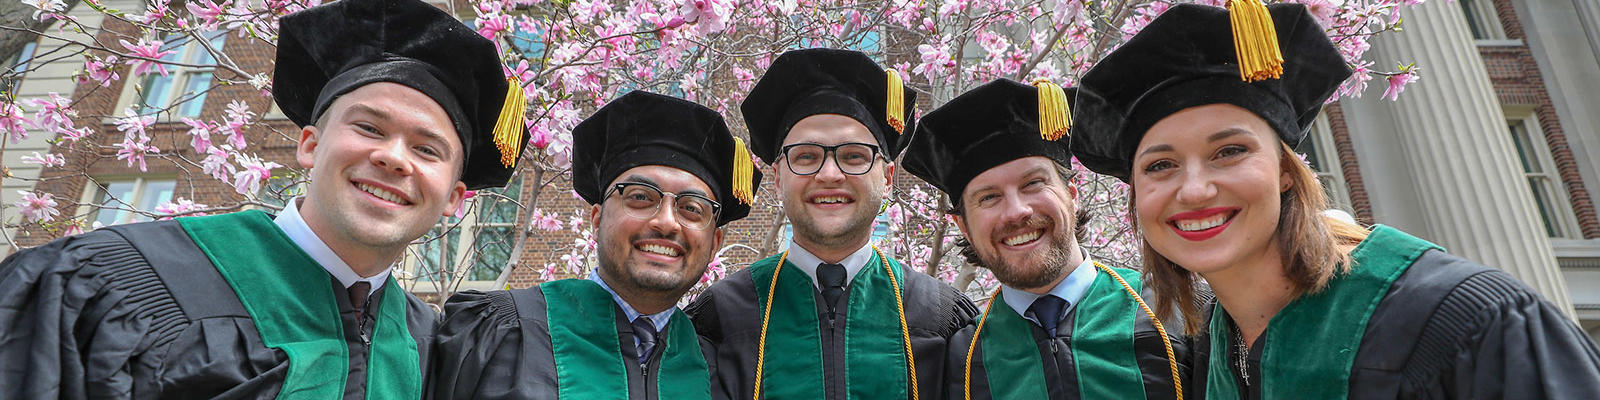 Five graduates in doctoral robes